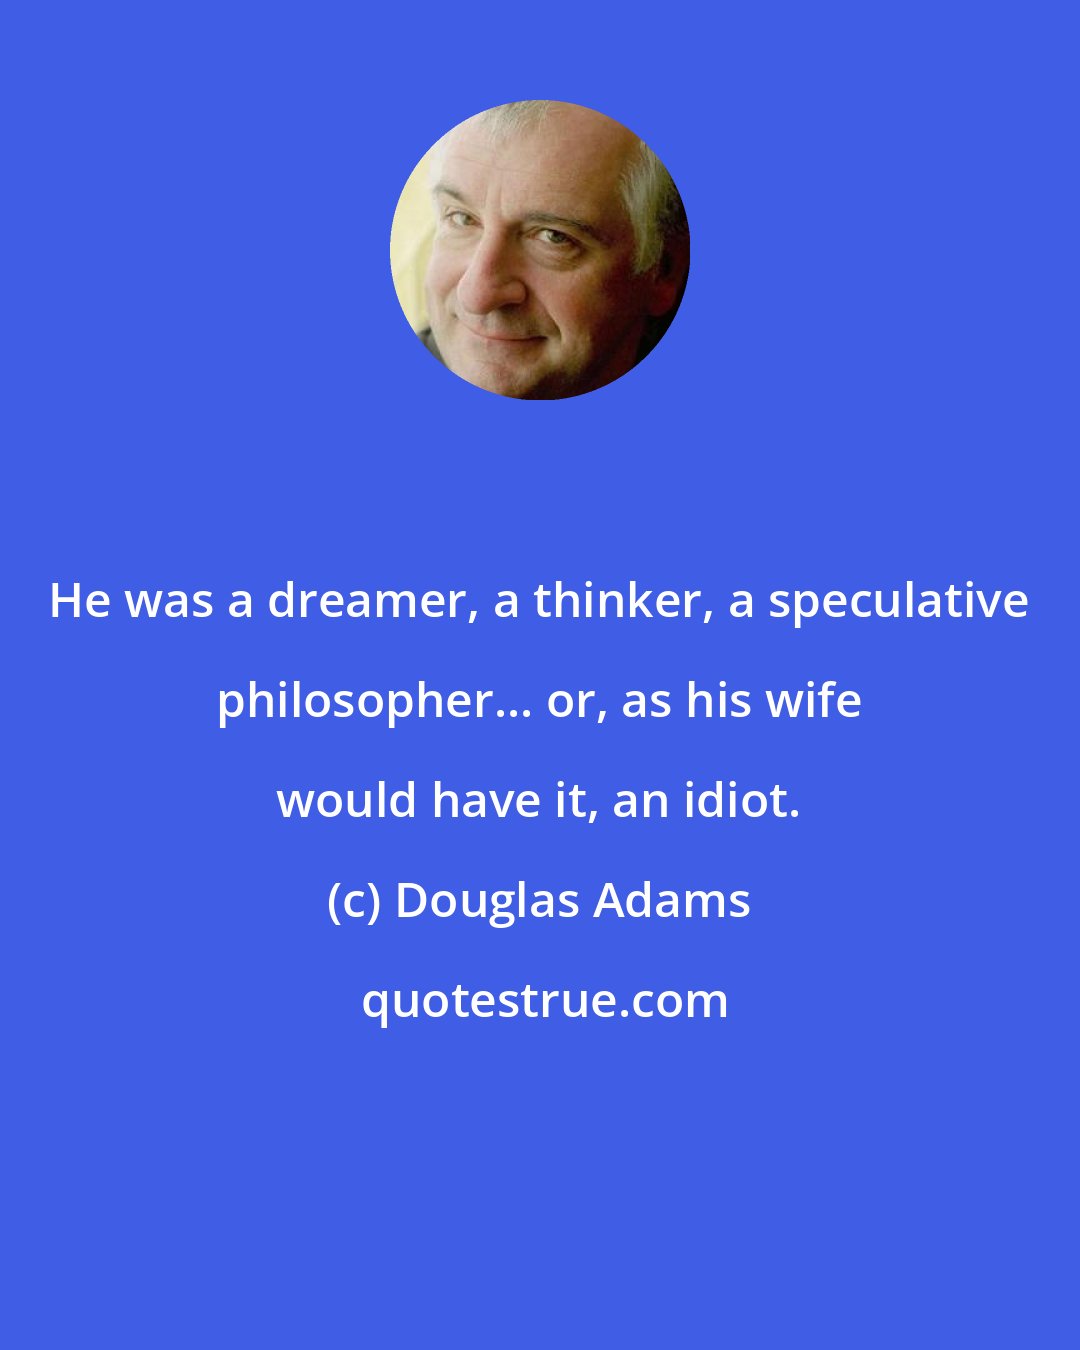 Douglas Adams: He was a dreamer, a thinker, a speculative philosopher... or, as his wife would have it, an idiot.